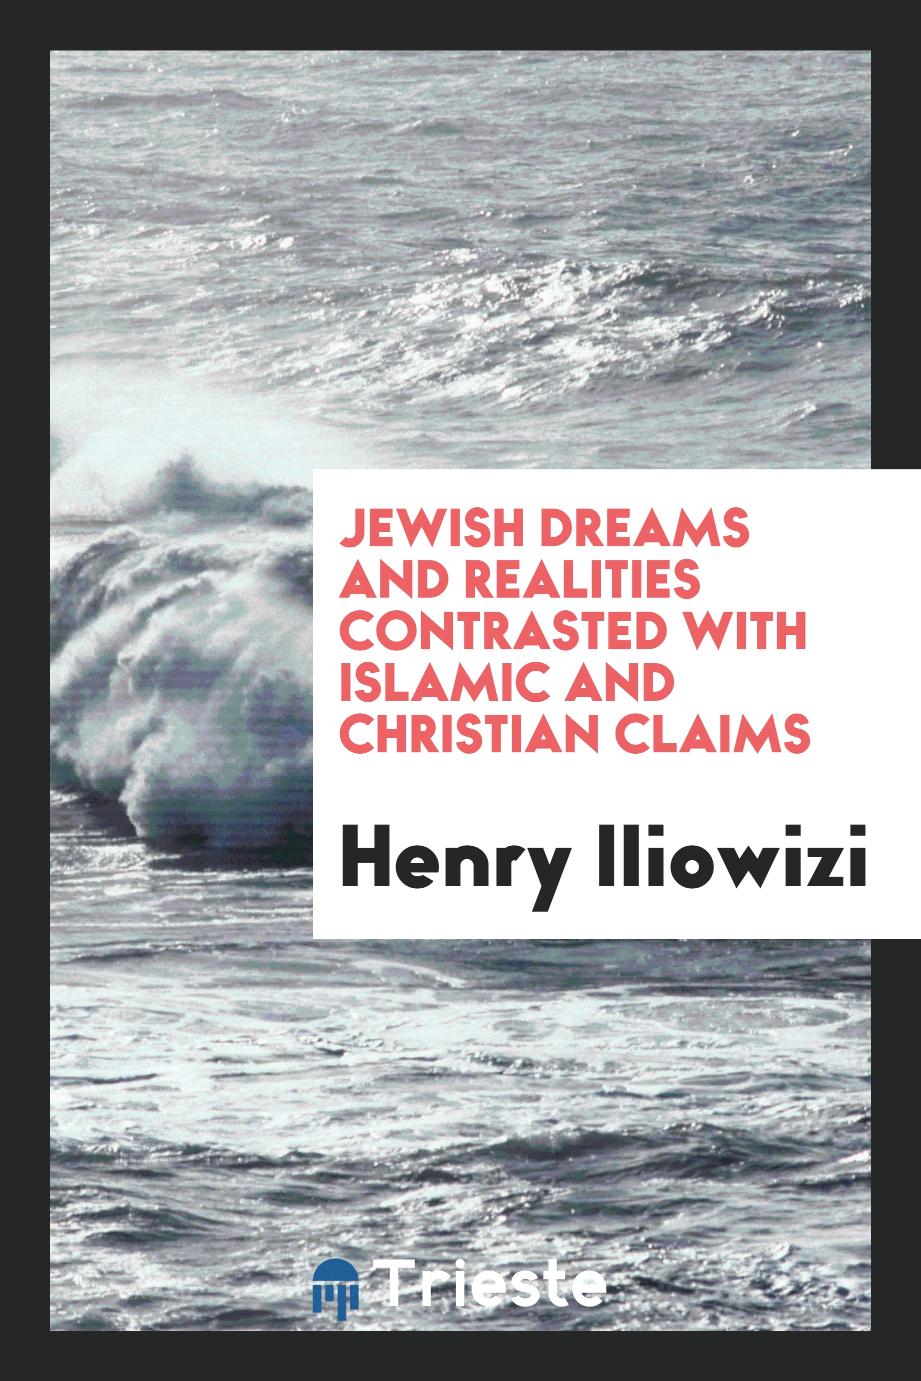 Jewish dreams and realities contrasted with Islamic and Christian claims